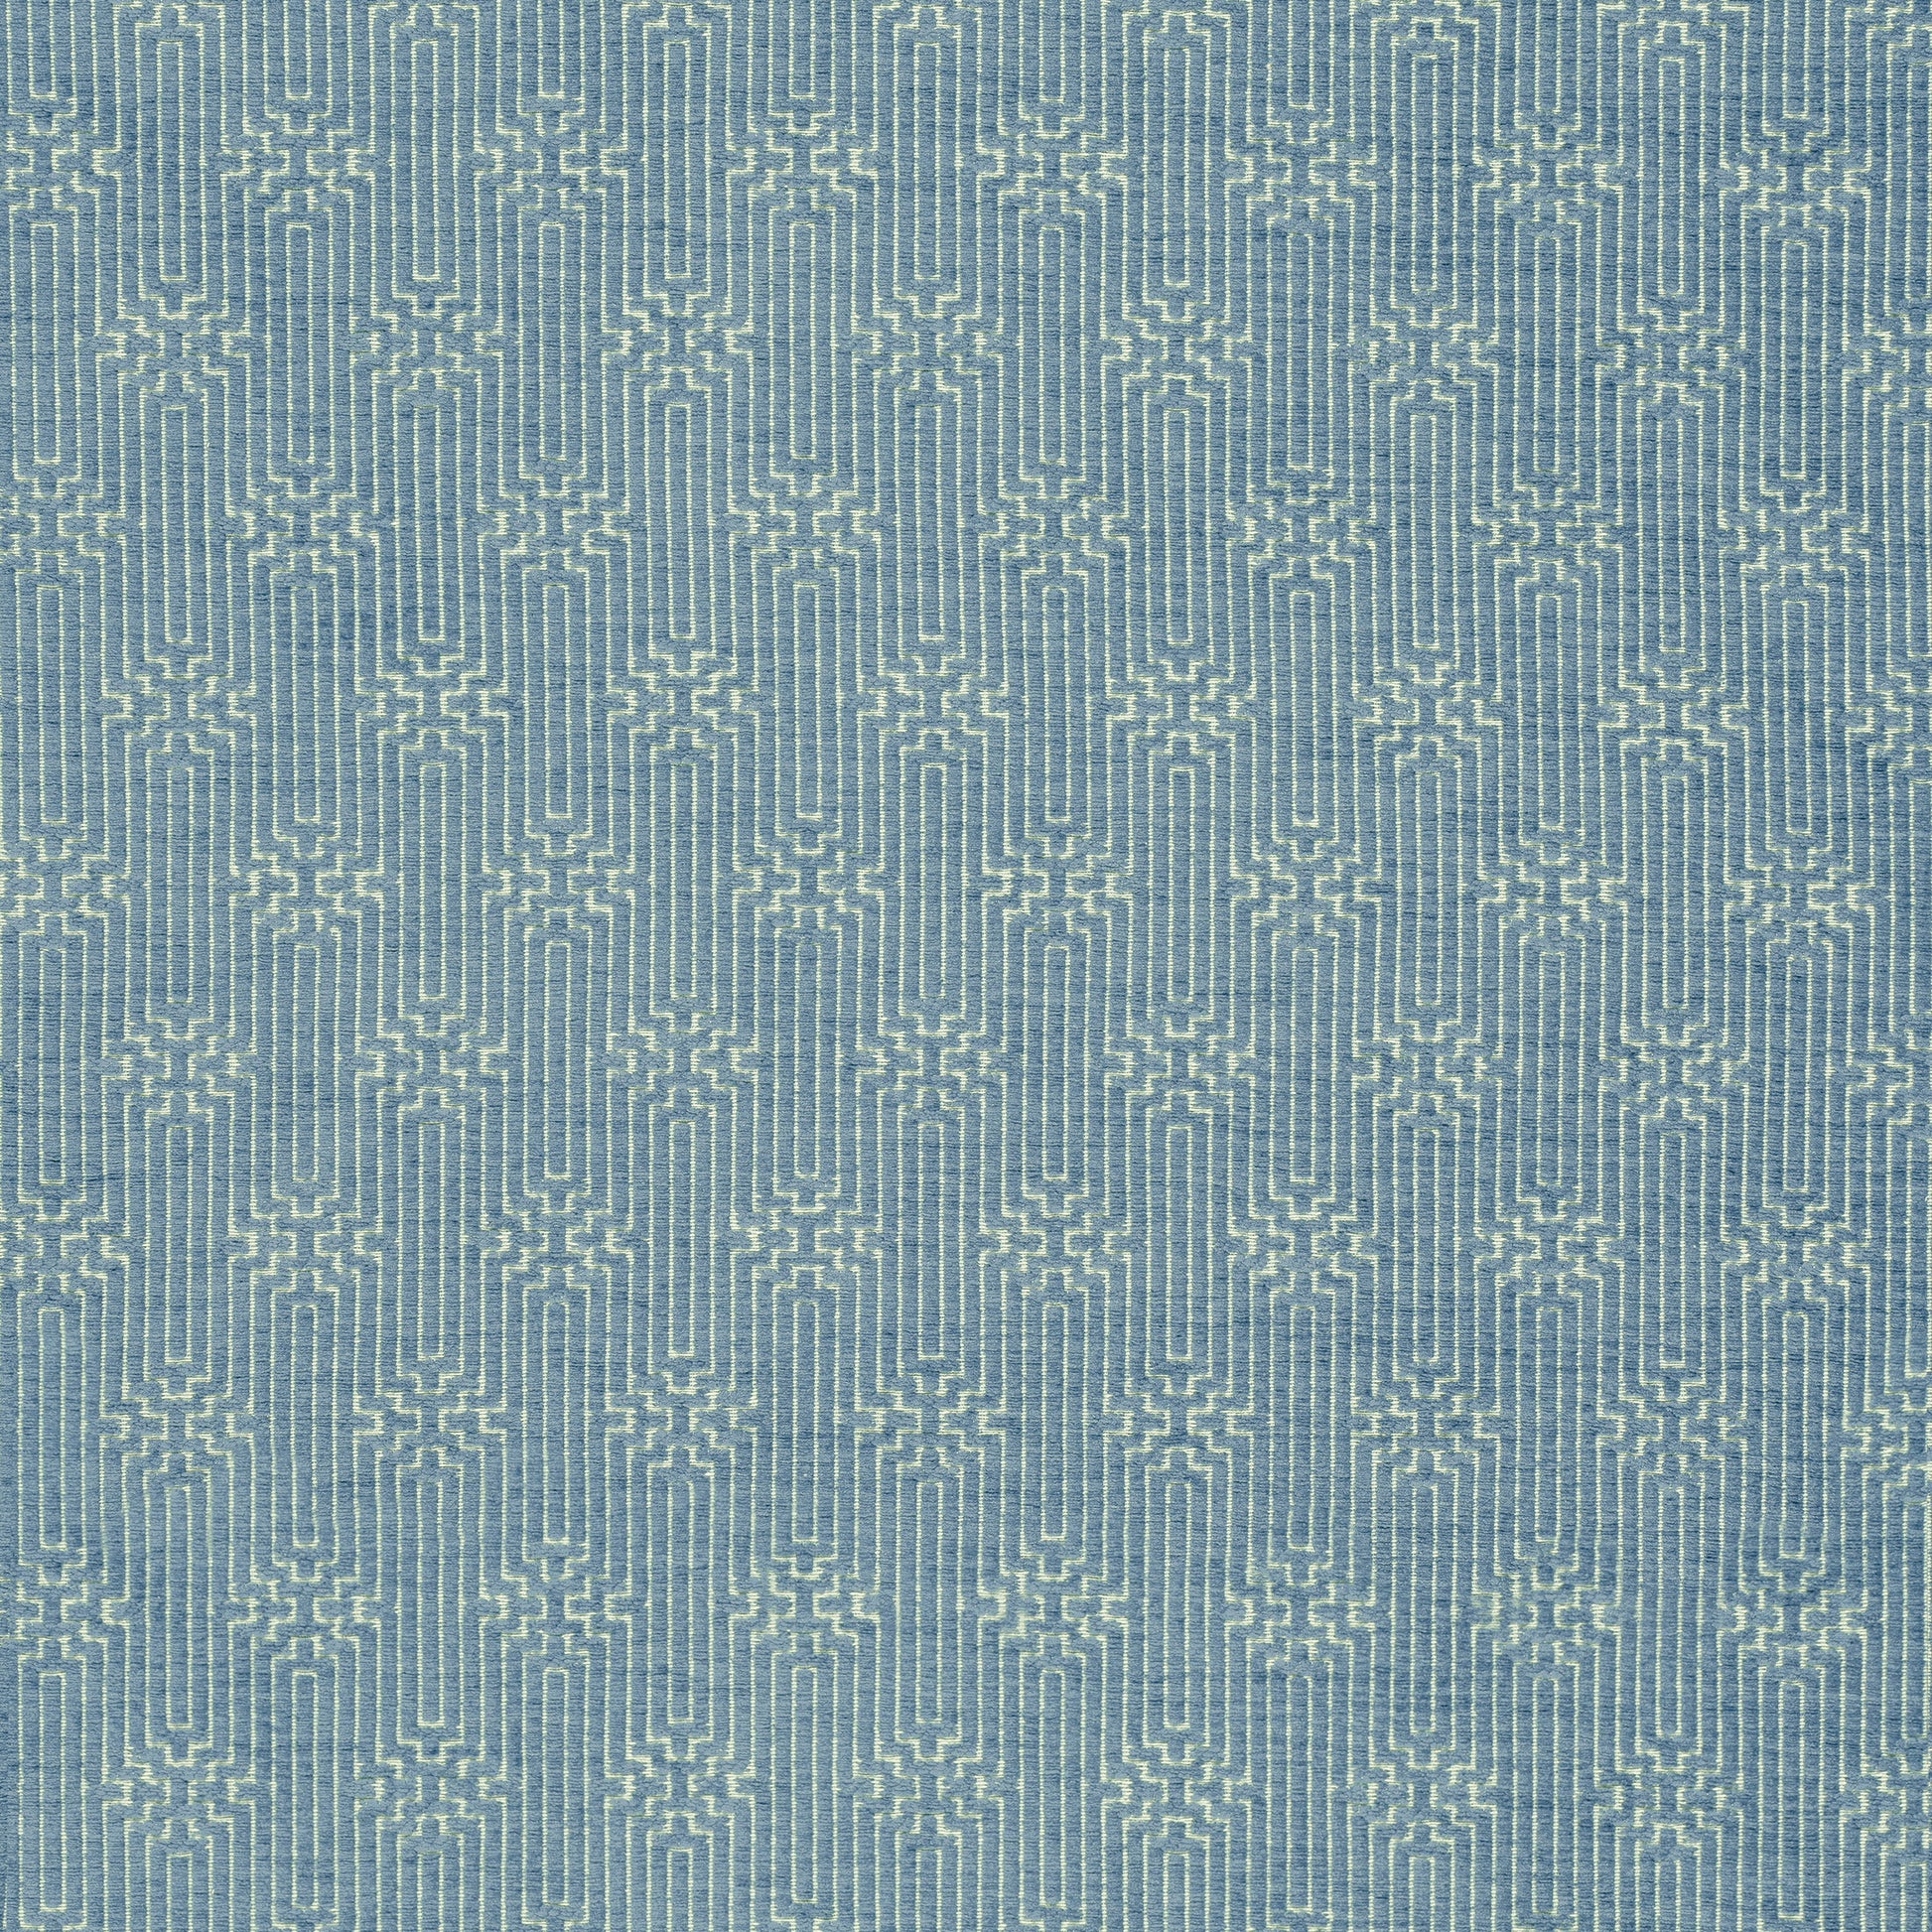 Purchase Thibaut Fabric Pattern number W74214 pattern name Crete color Slate